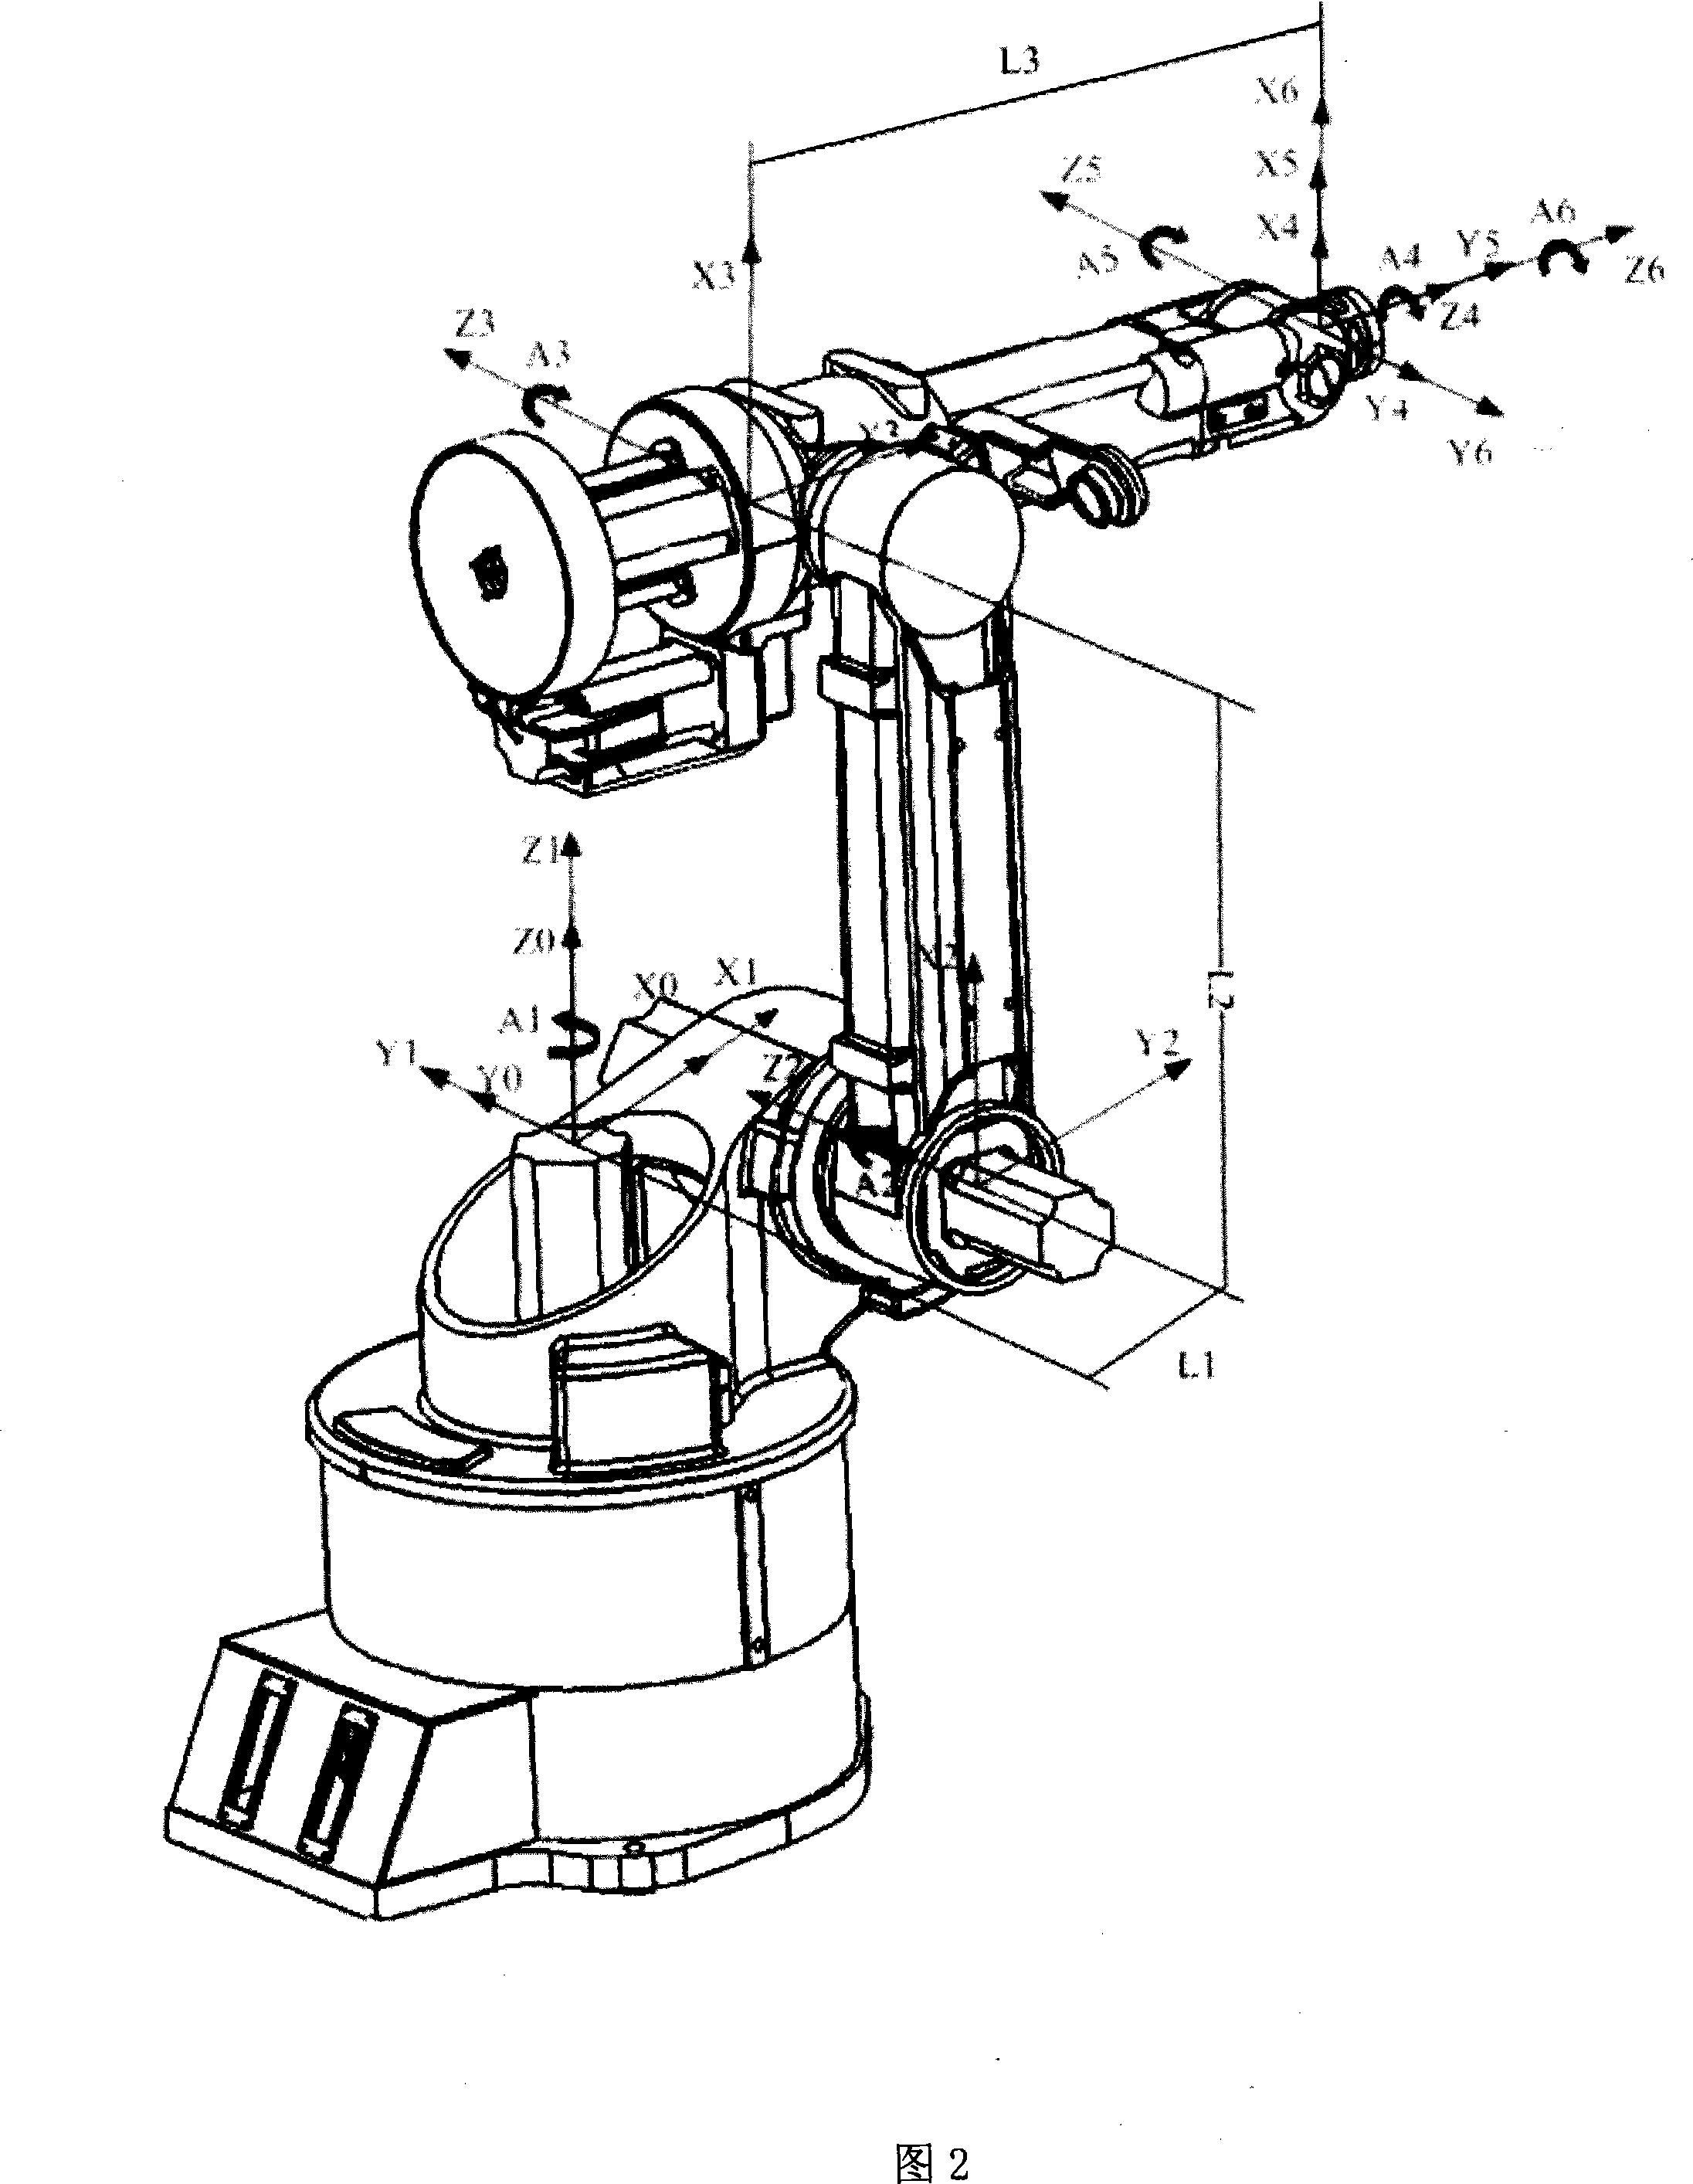 Method for calibrating industry robot